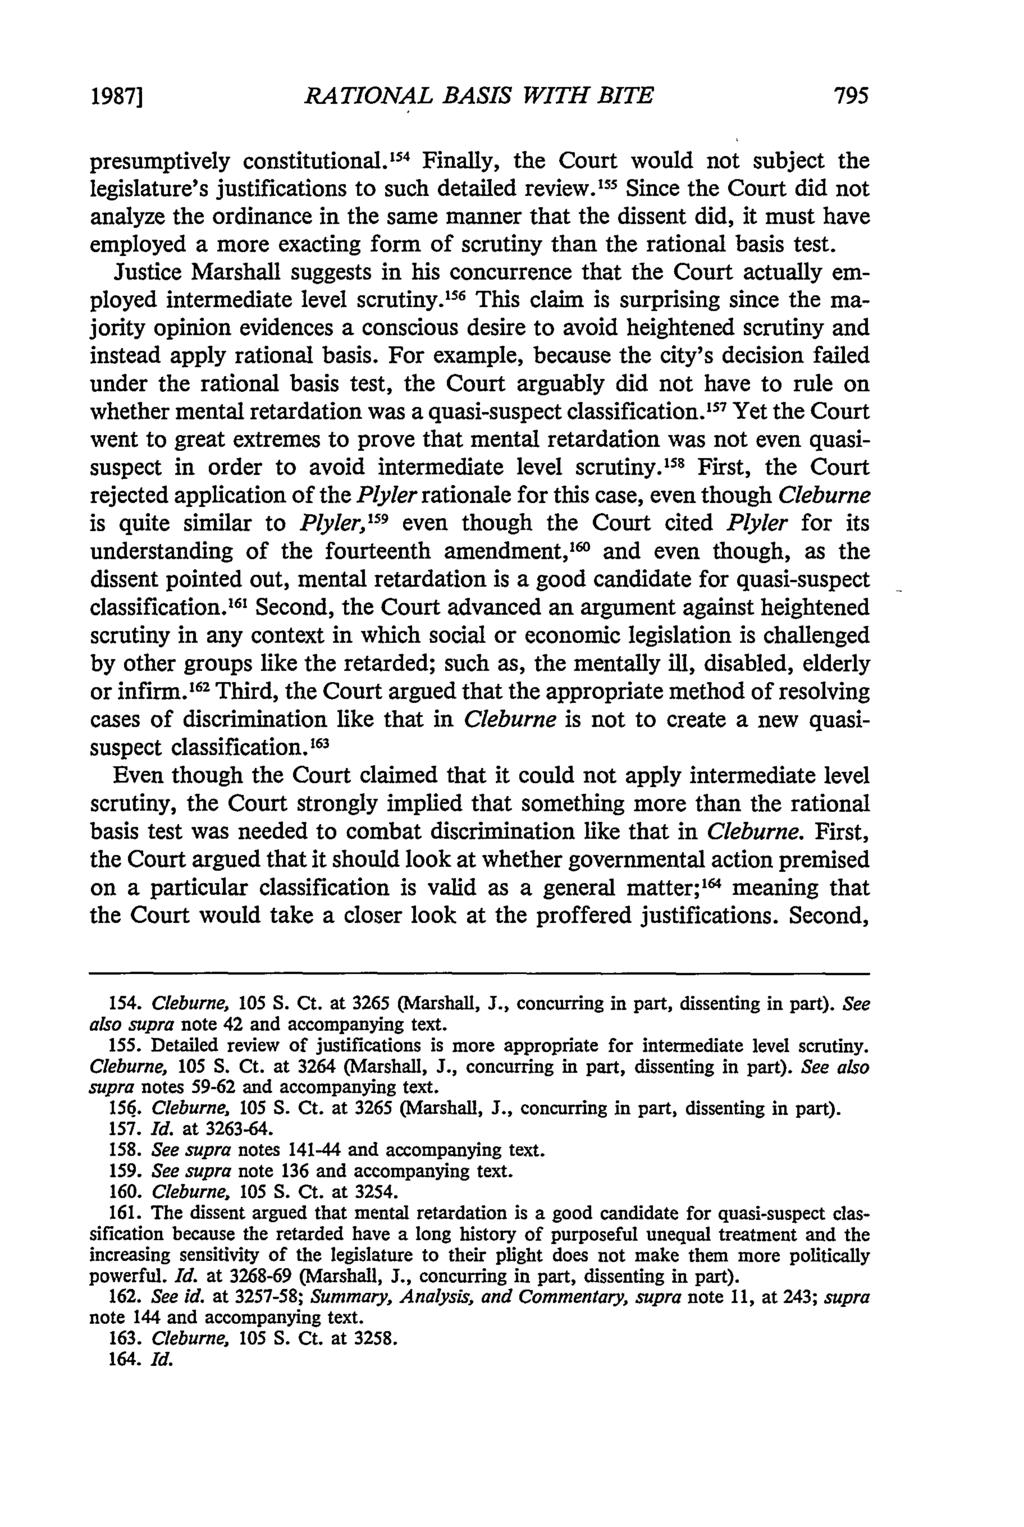 1987] RATIONAL BASIS WITH BITE presumptively constitutional. 154 Finally, the Court would not subject the legislature's justifications to such detailed review.